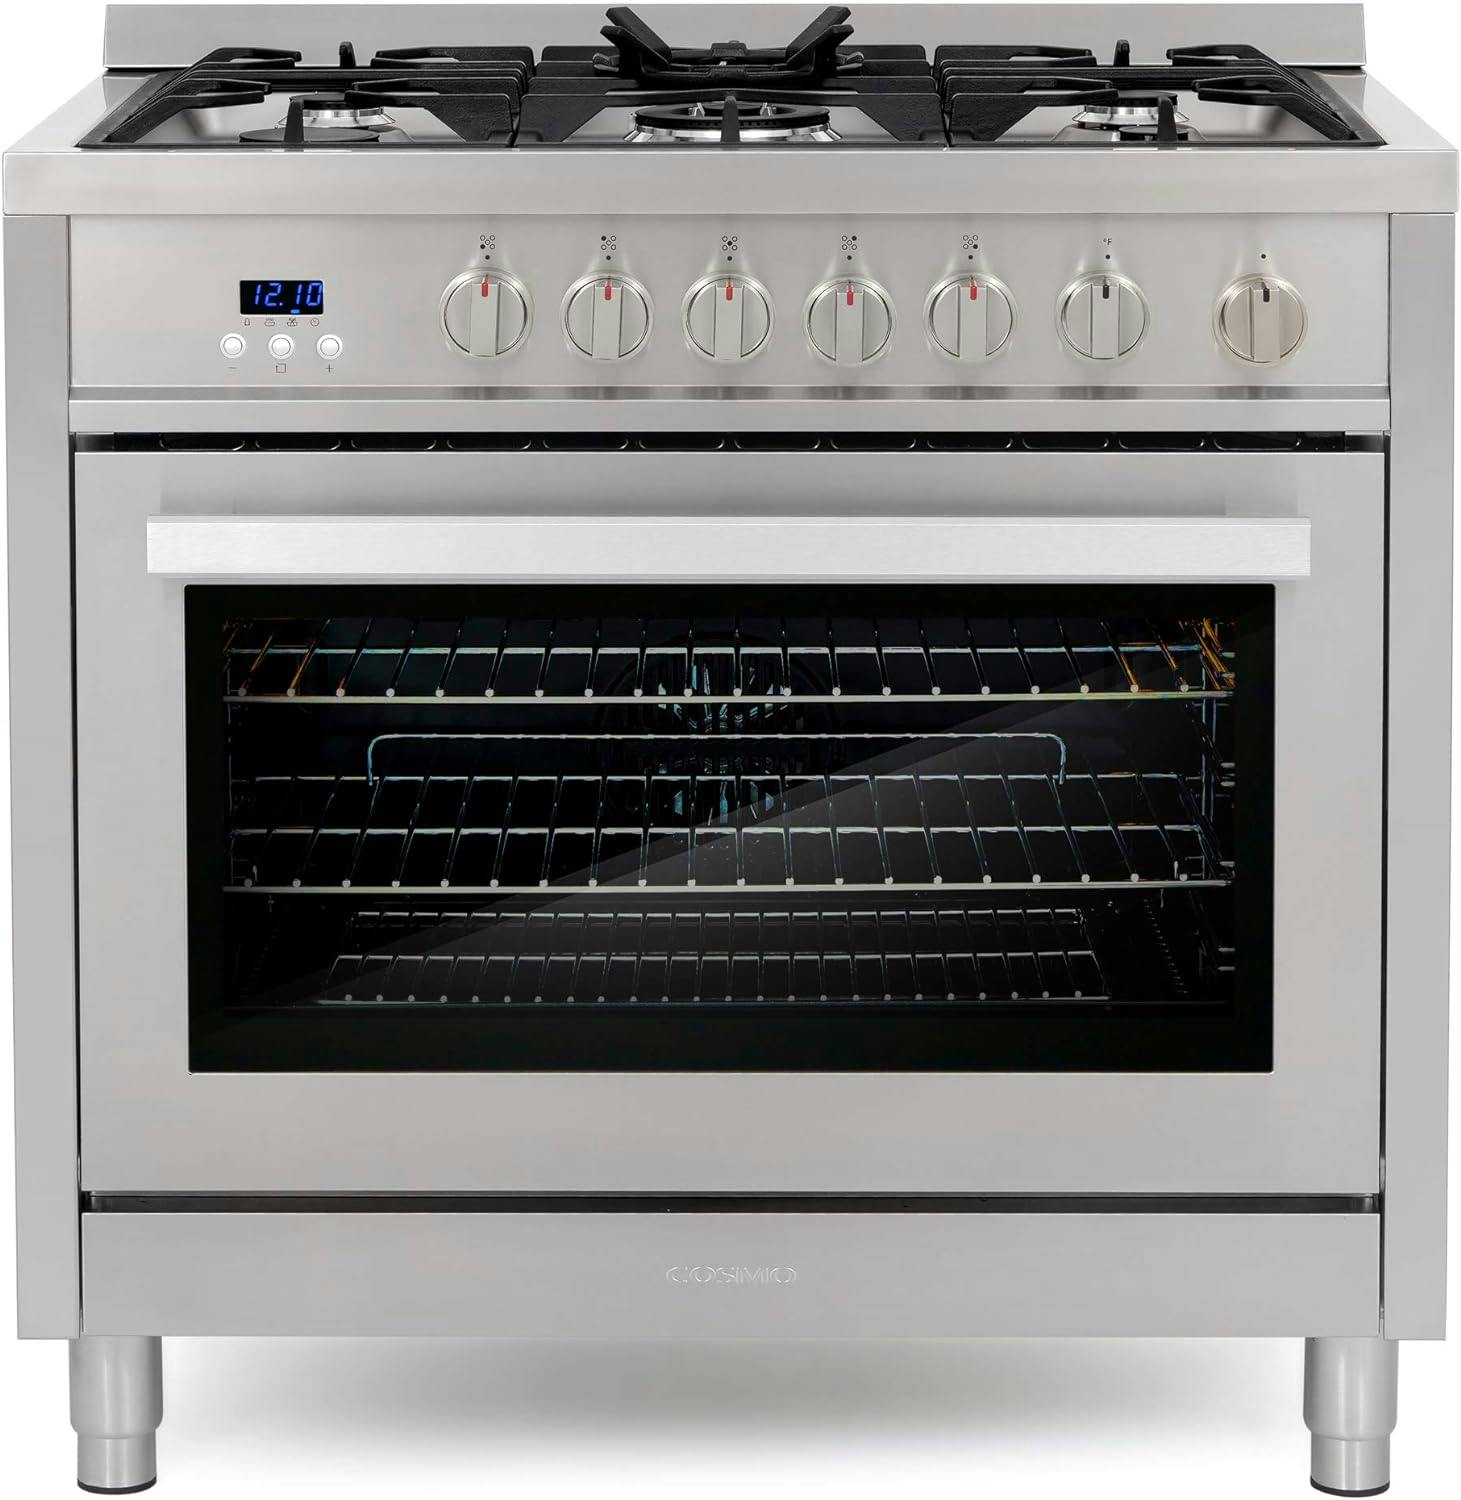 Stainless Steel 36" Gas Range with 5 Burner Cooktop and Rapid Convection Oven